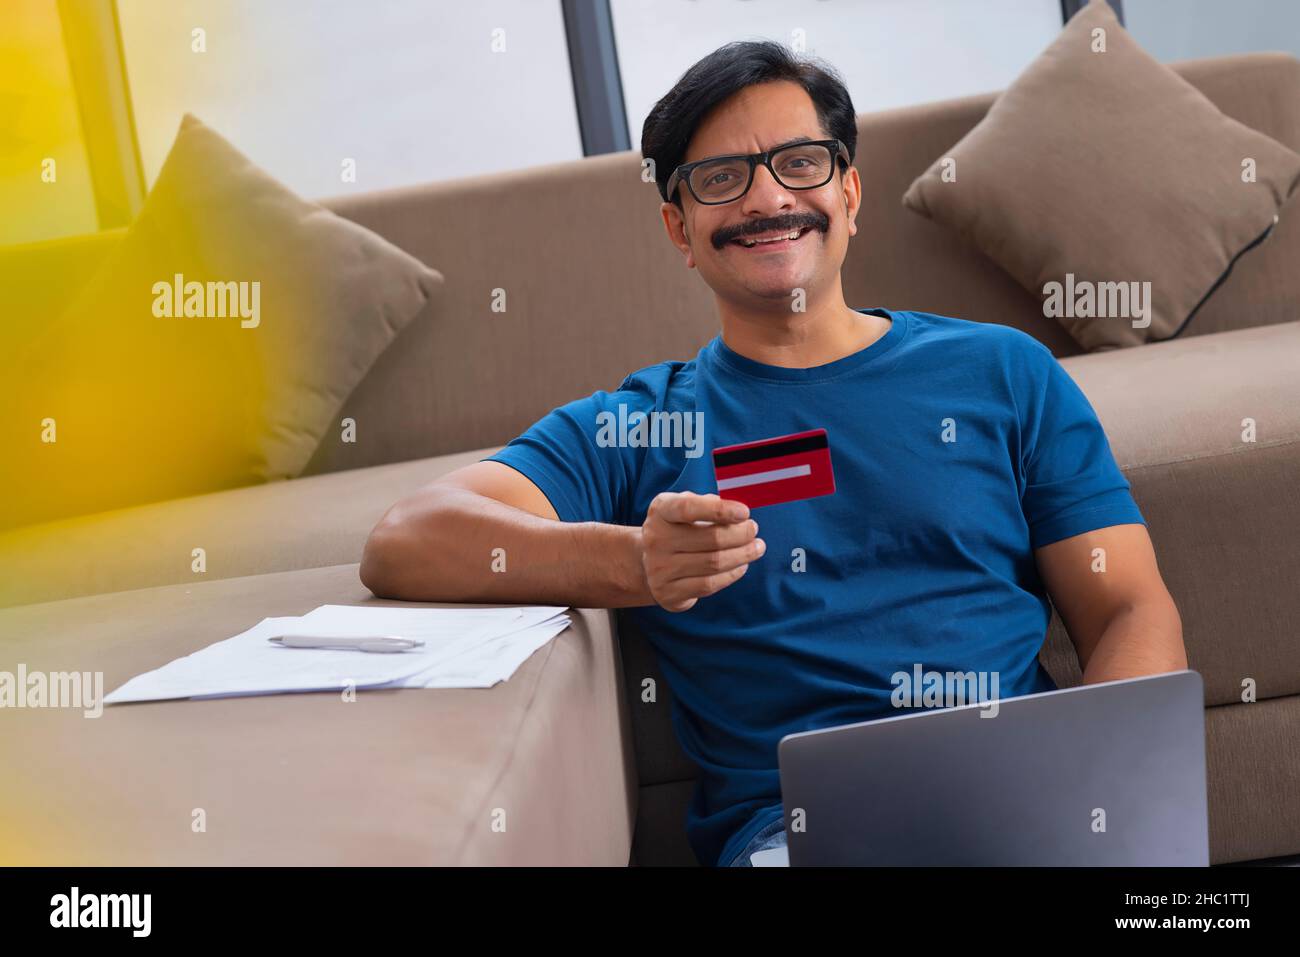 Middle age man shopping online through laptop using credit card while sitting on sofa Stock Photo